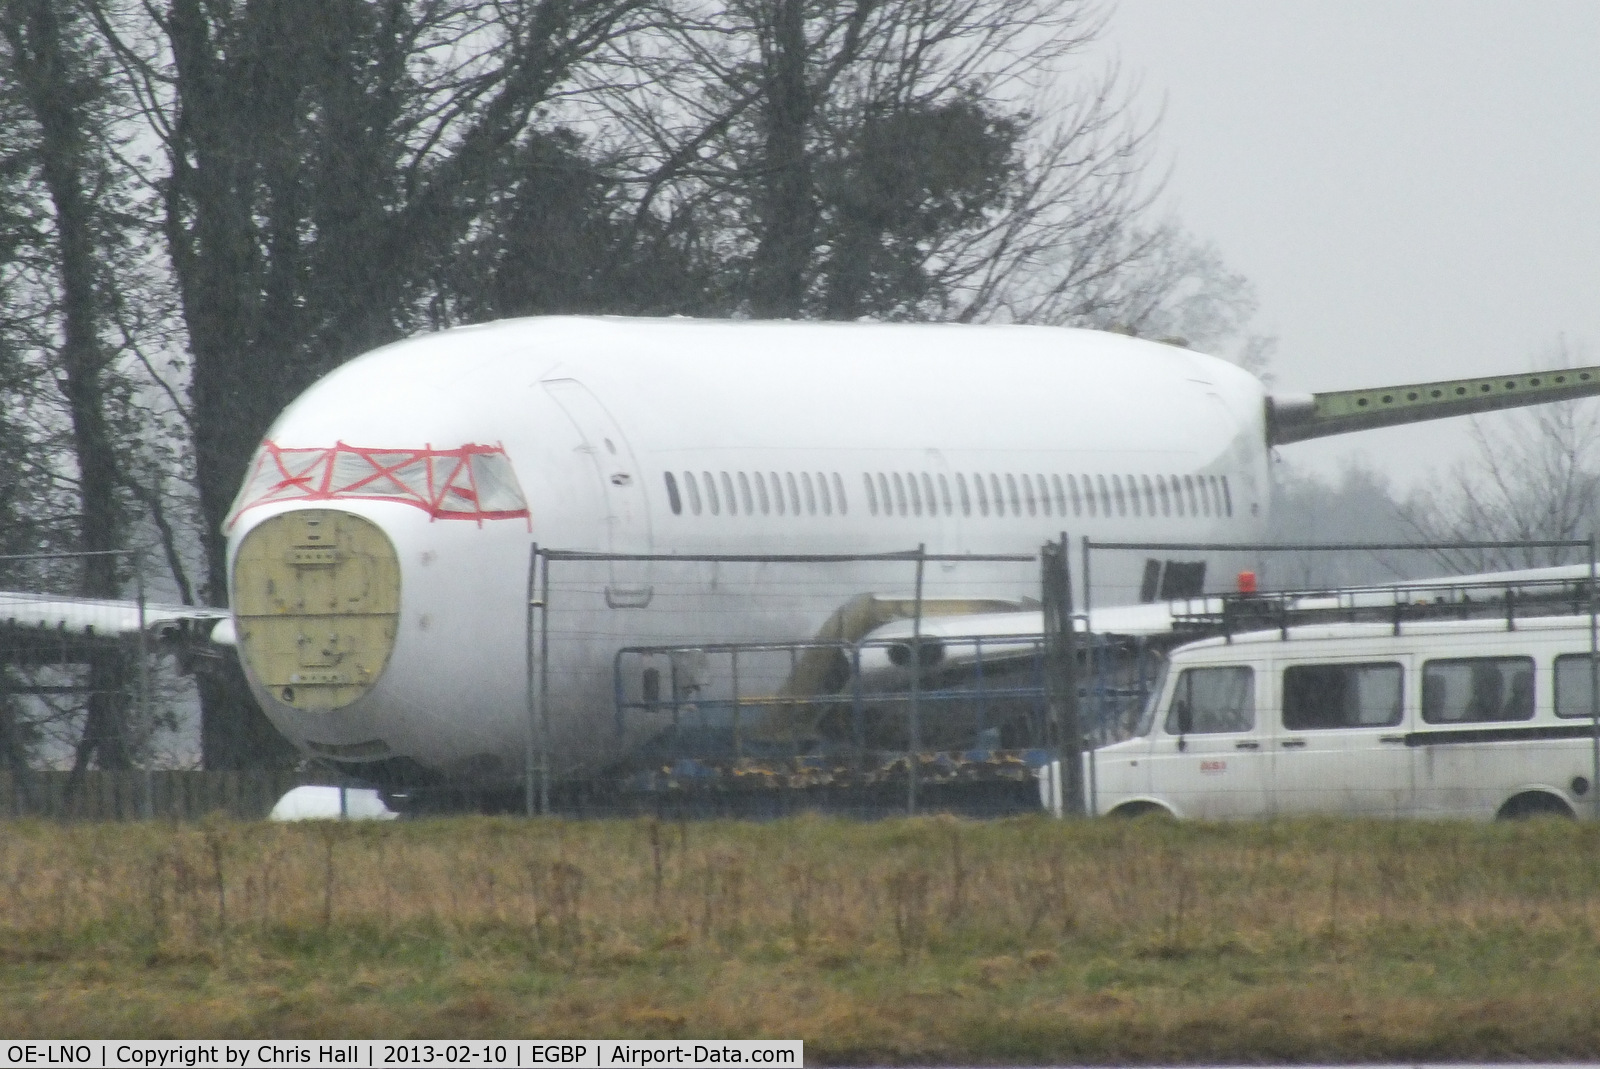 OE-LNO, 2001 Boeing 737-7Z9 C/N 30419, ex Austrian Airlines B737, only 11 years old and being parted out by ASI at Kemble